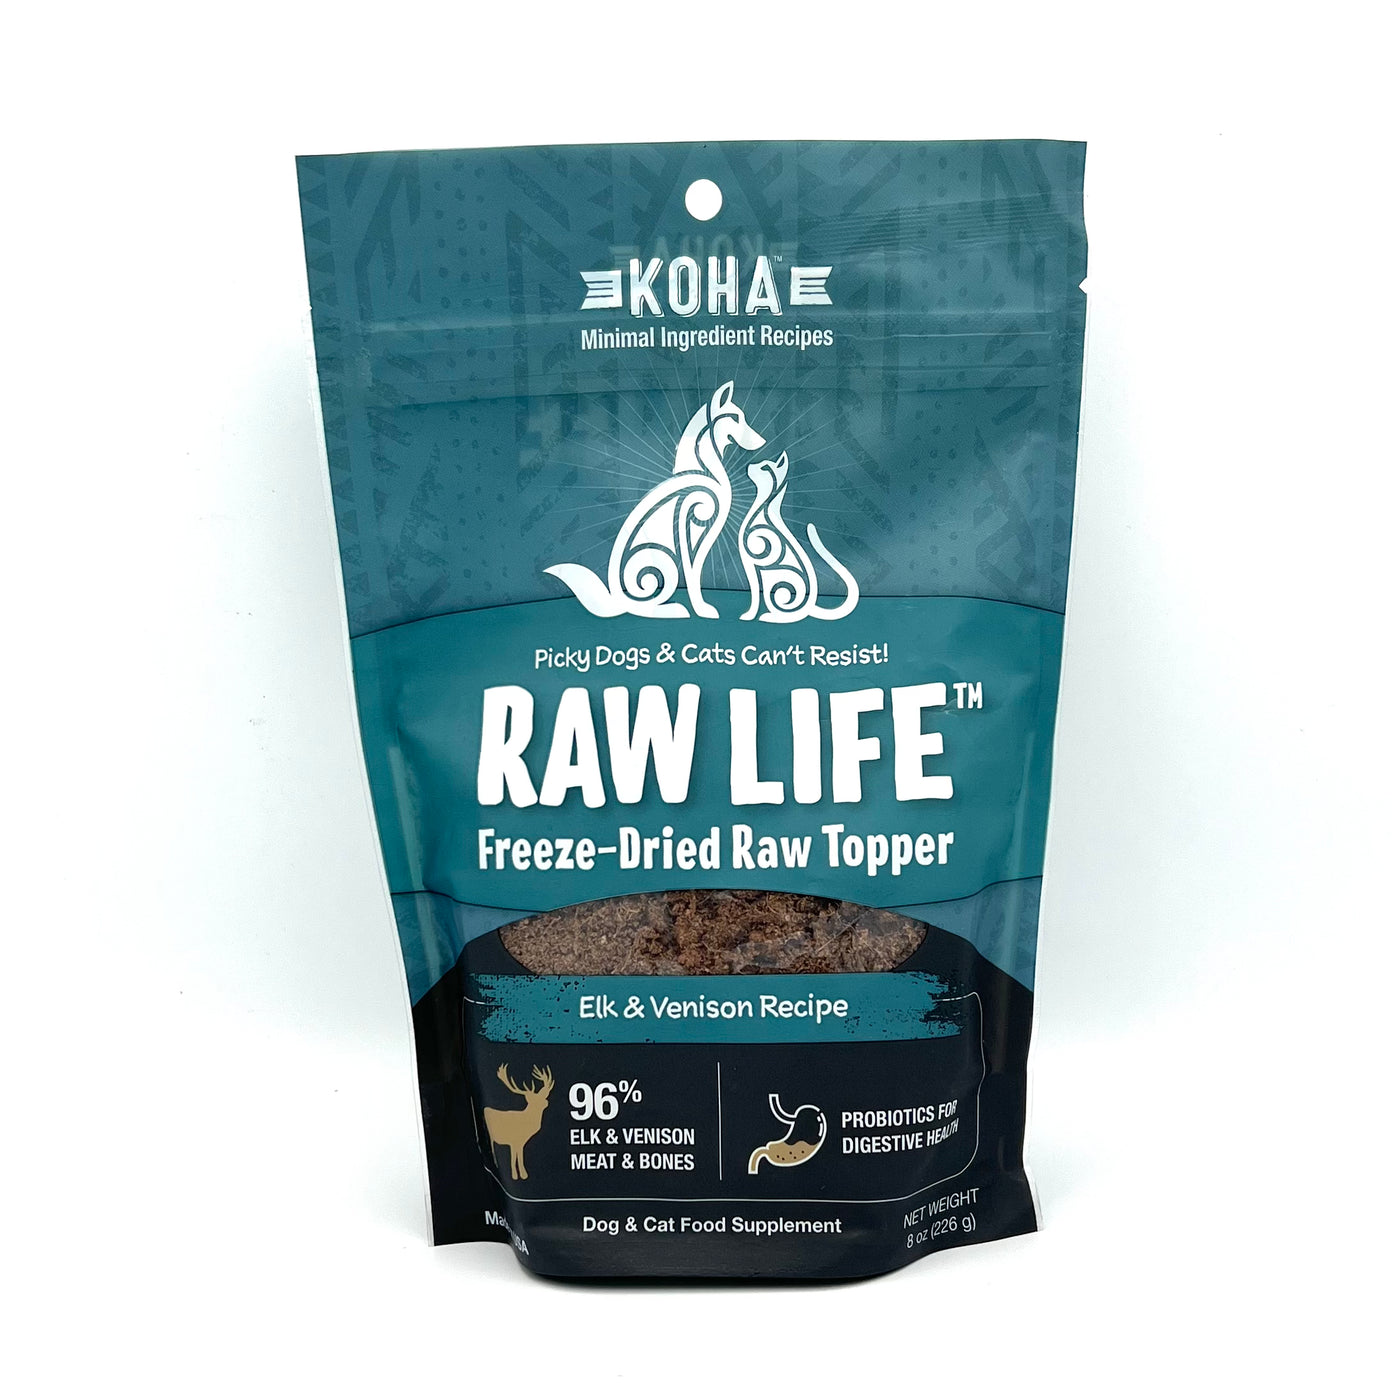 Koha Freeze-Dried Raw Topper Elk & Venison Recipe for Dogs and Cats 8oz Bag